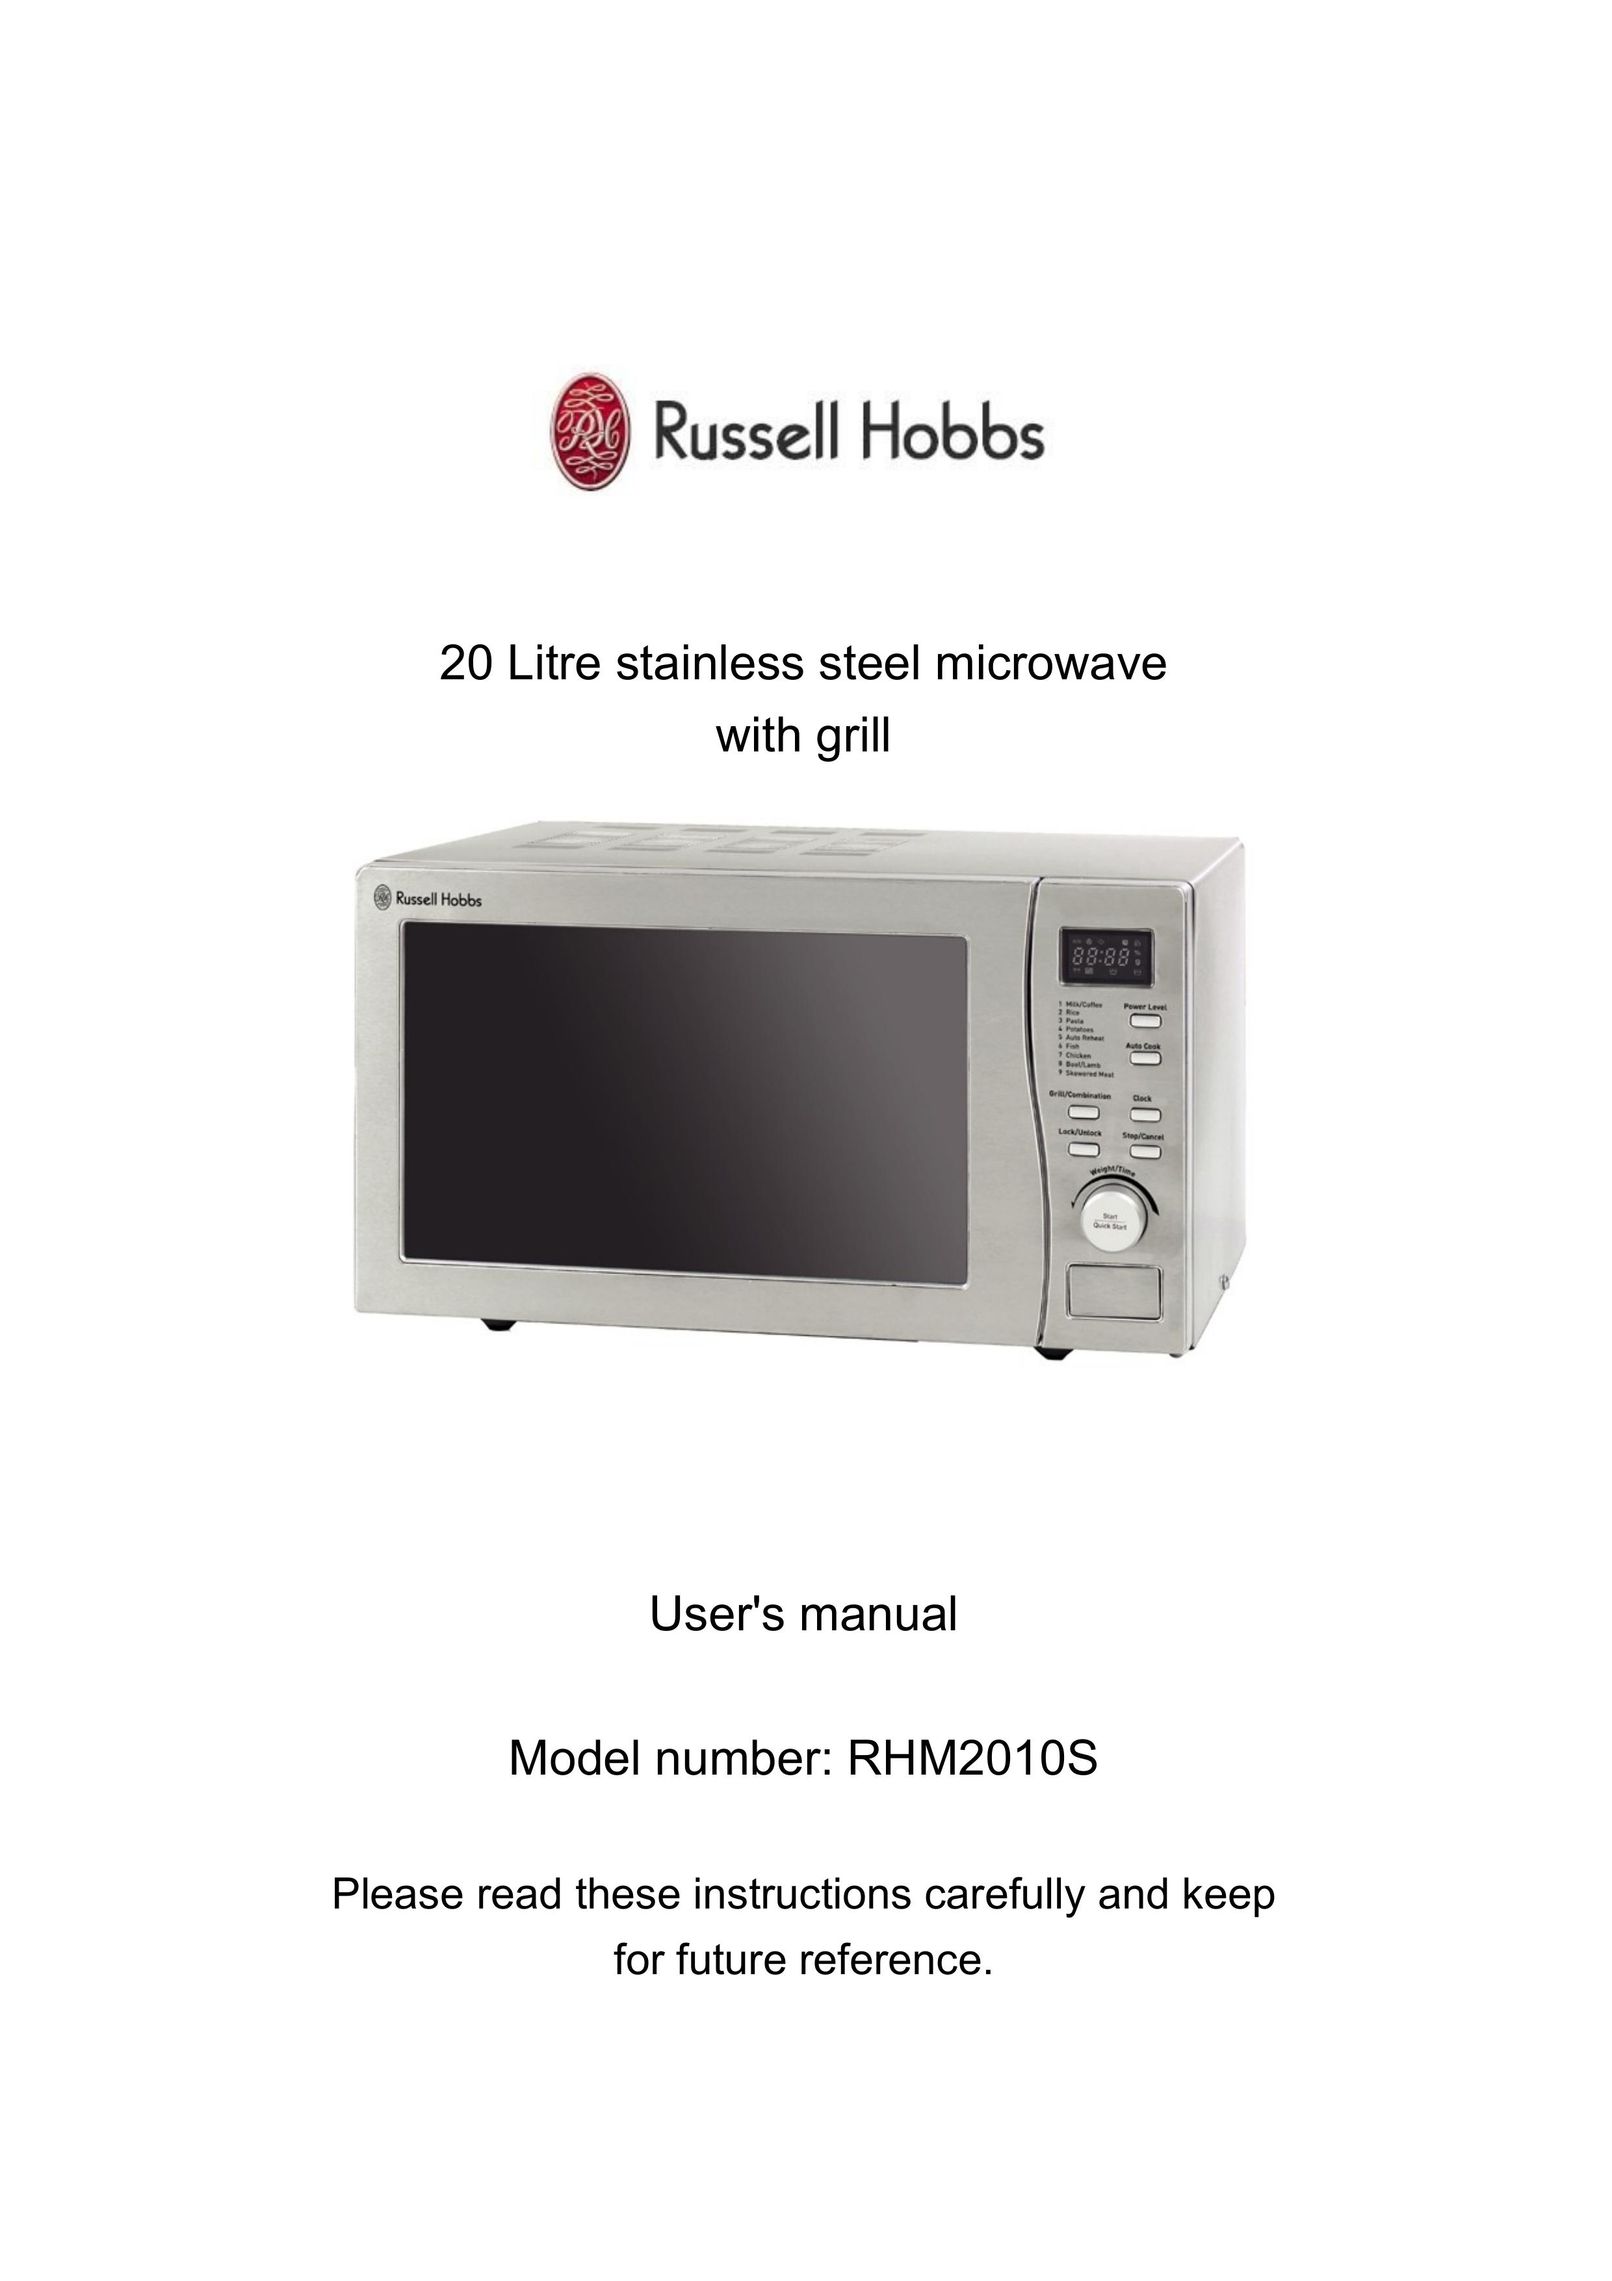 Russell Hobbs RHM2010S Microwave Oven User Manual